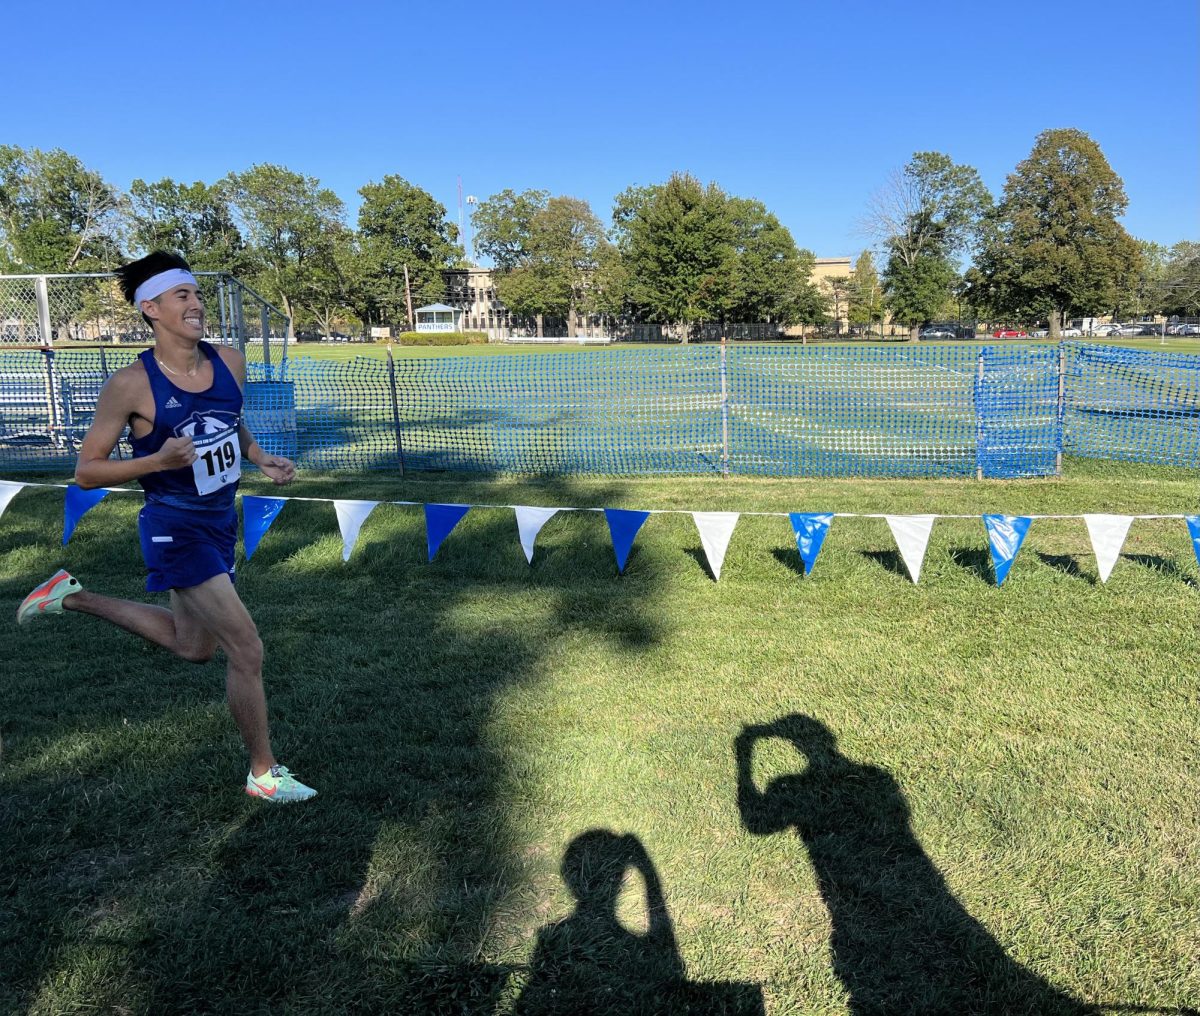 Fifth year runner Adam Swanson, runs to the finish line on Friday afternoon at the EIU Walt Crawford Open.